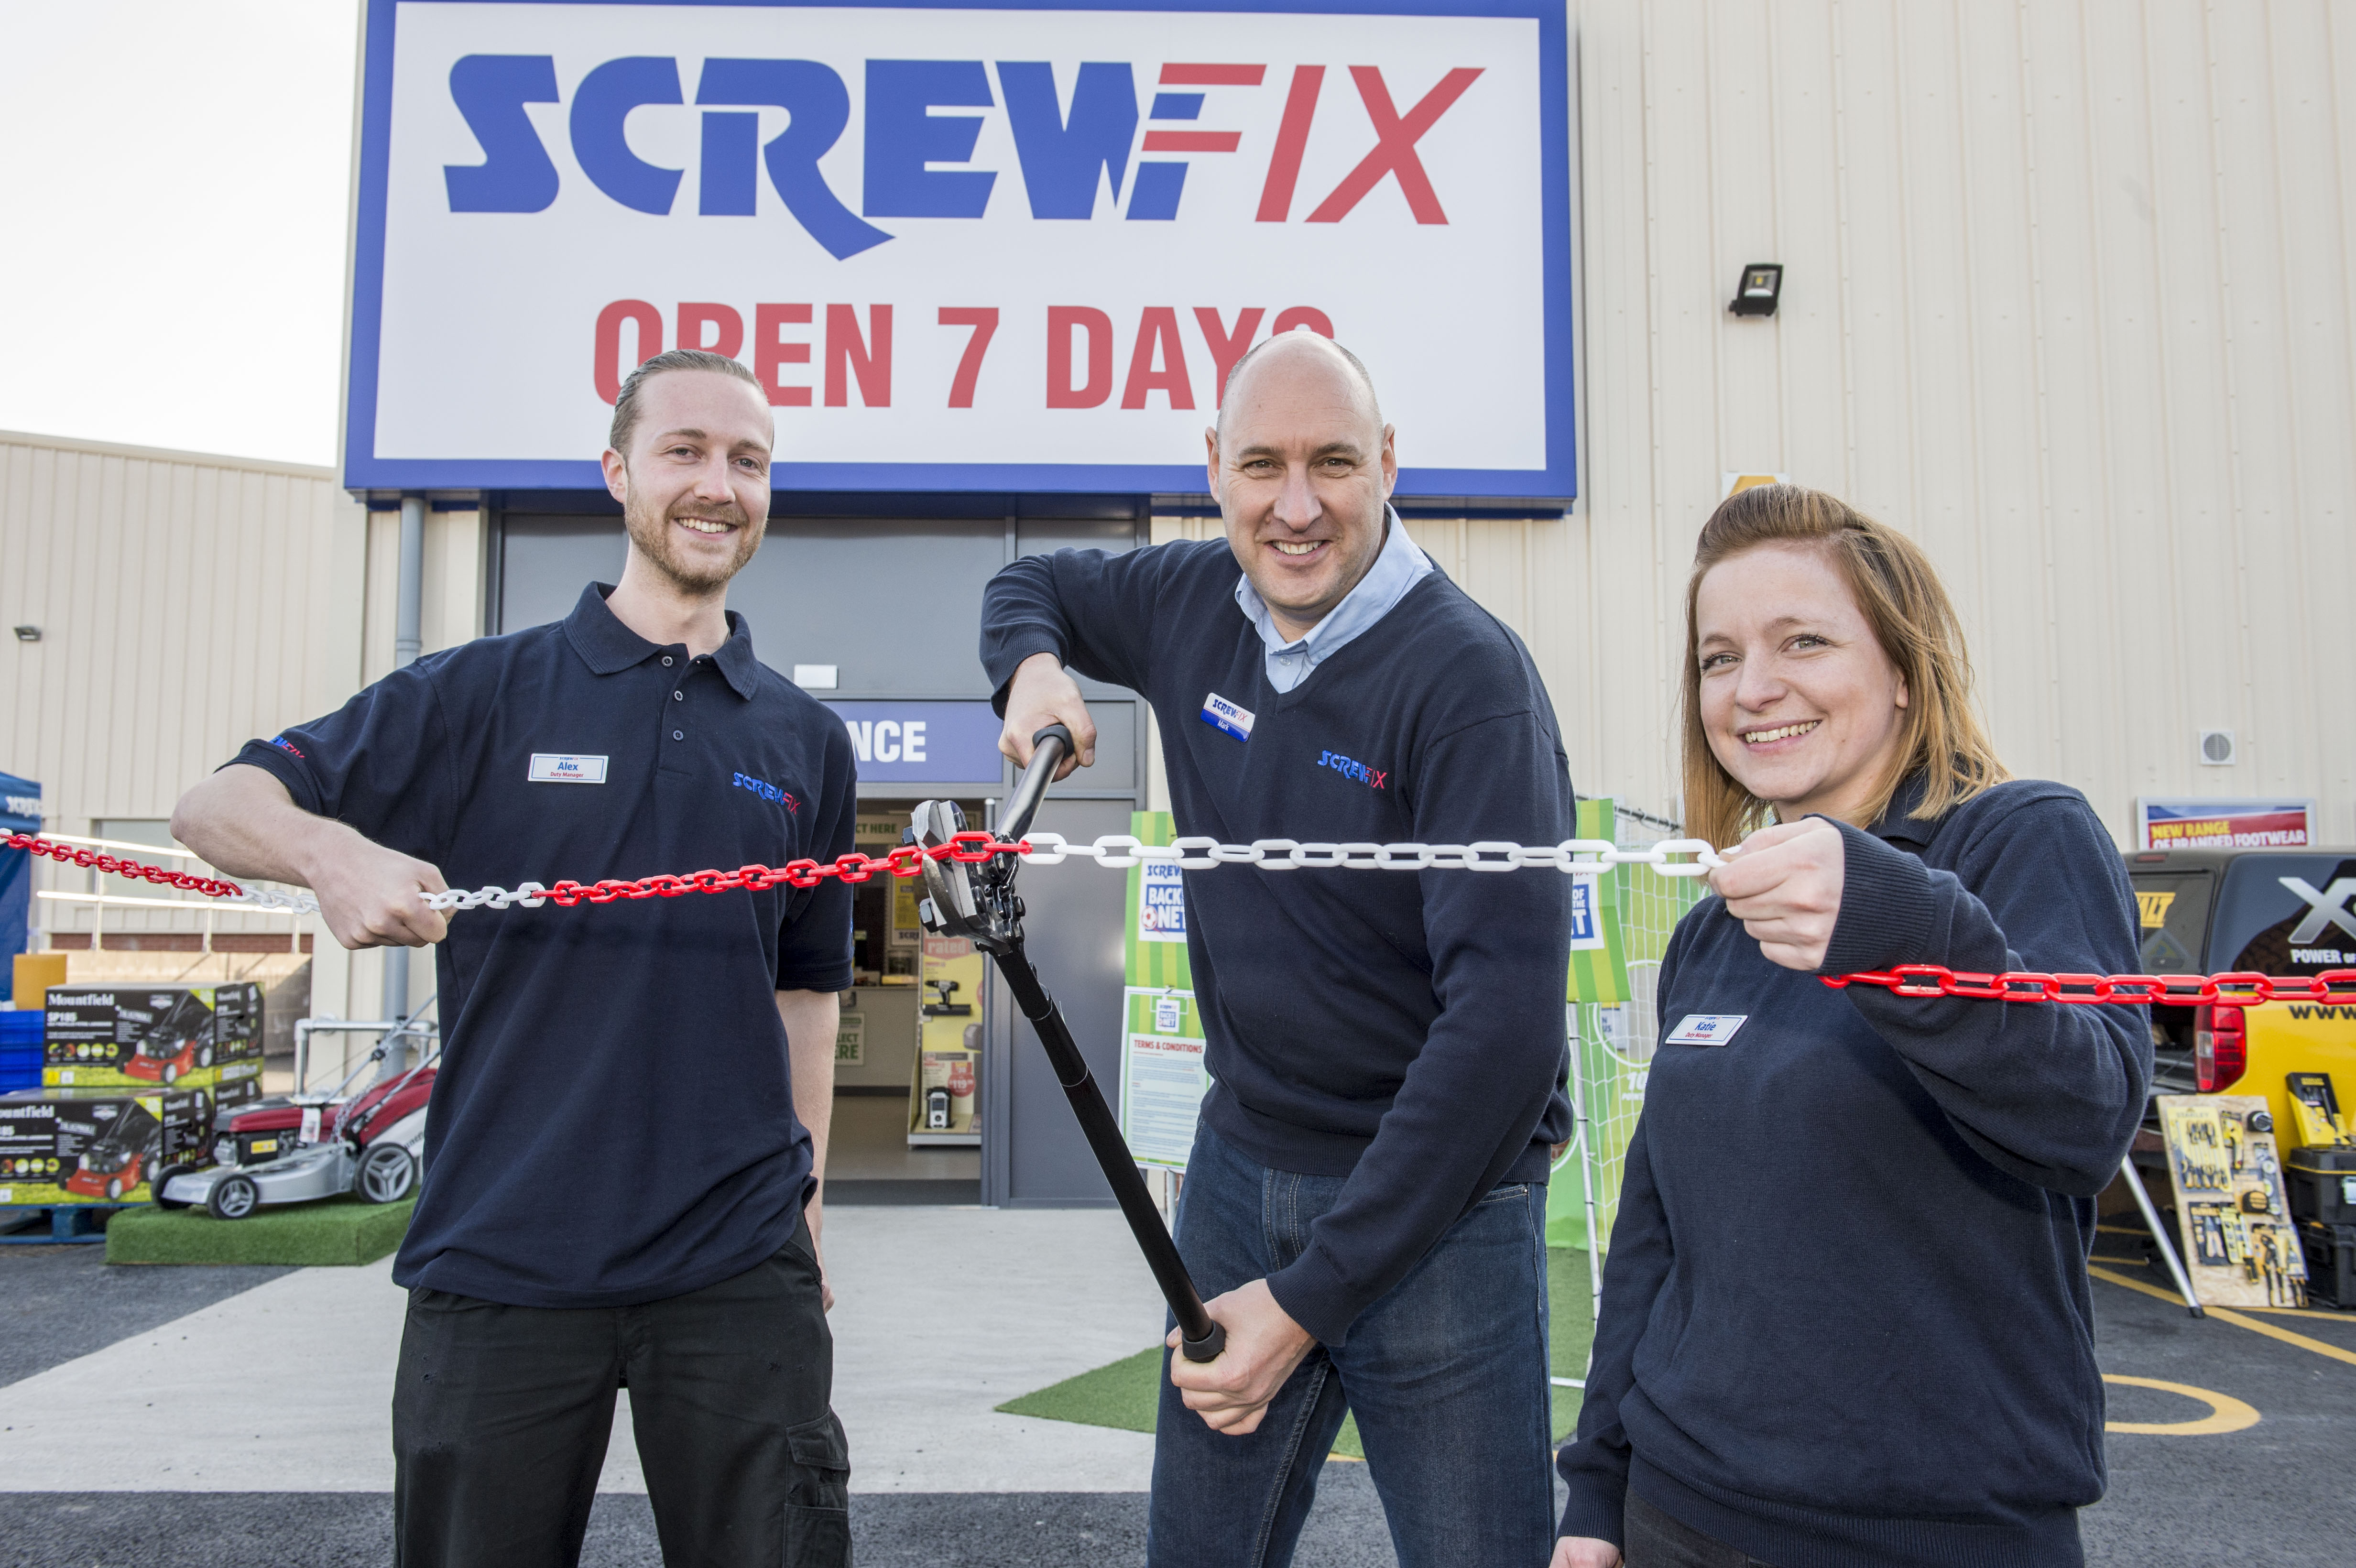 Leicester’s third Screwfix store is declared a runaway success